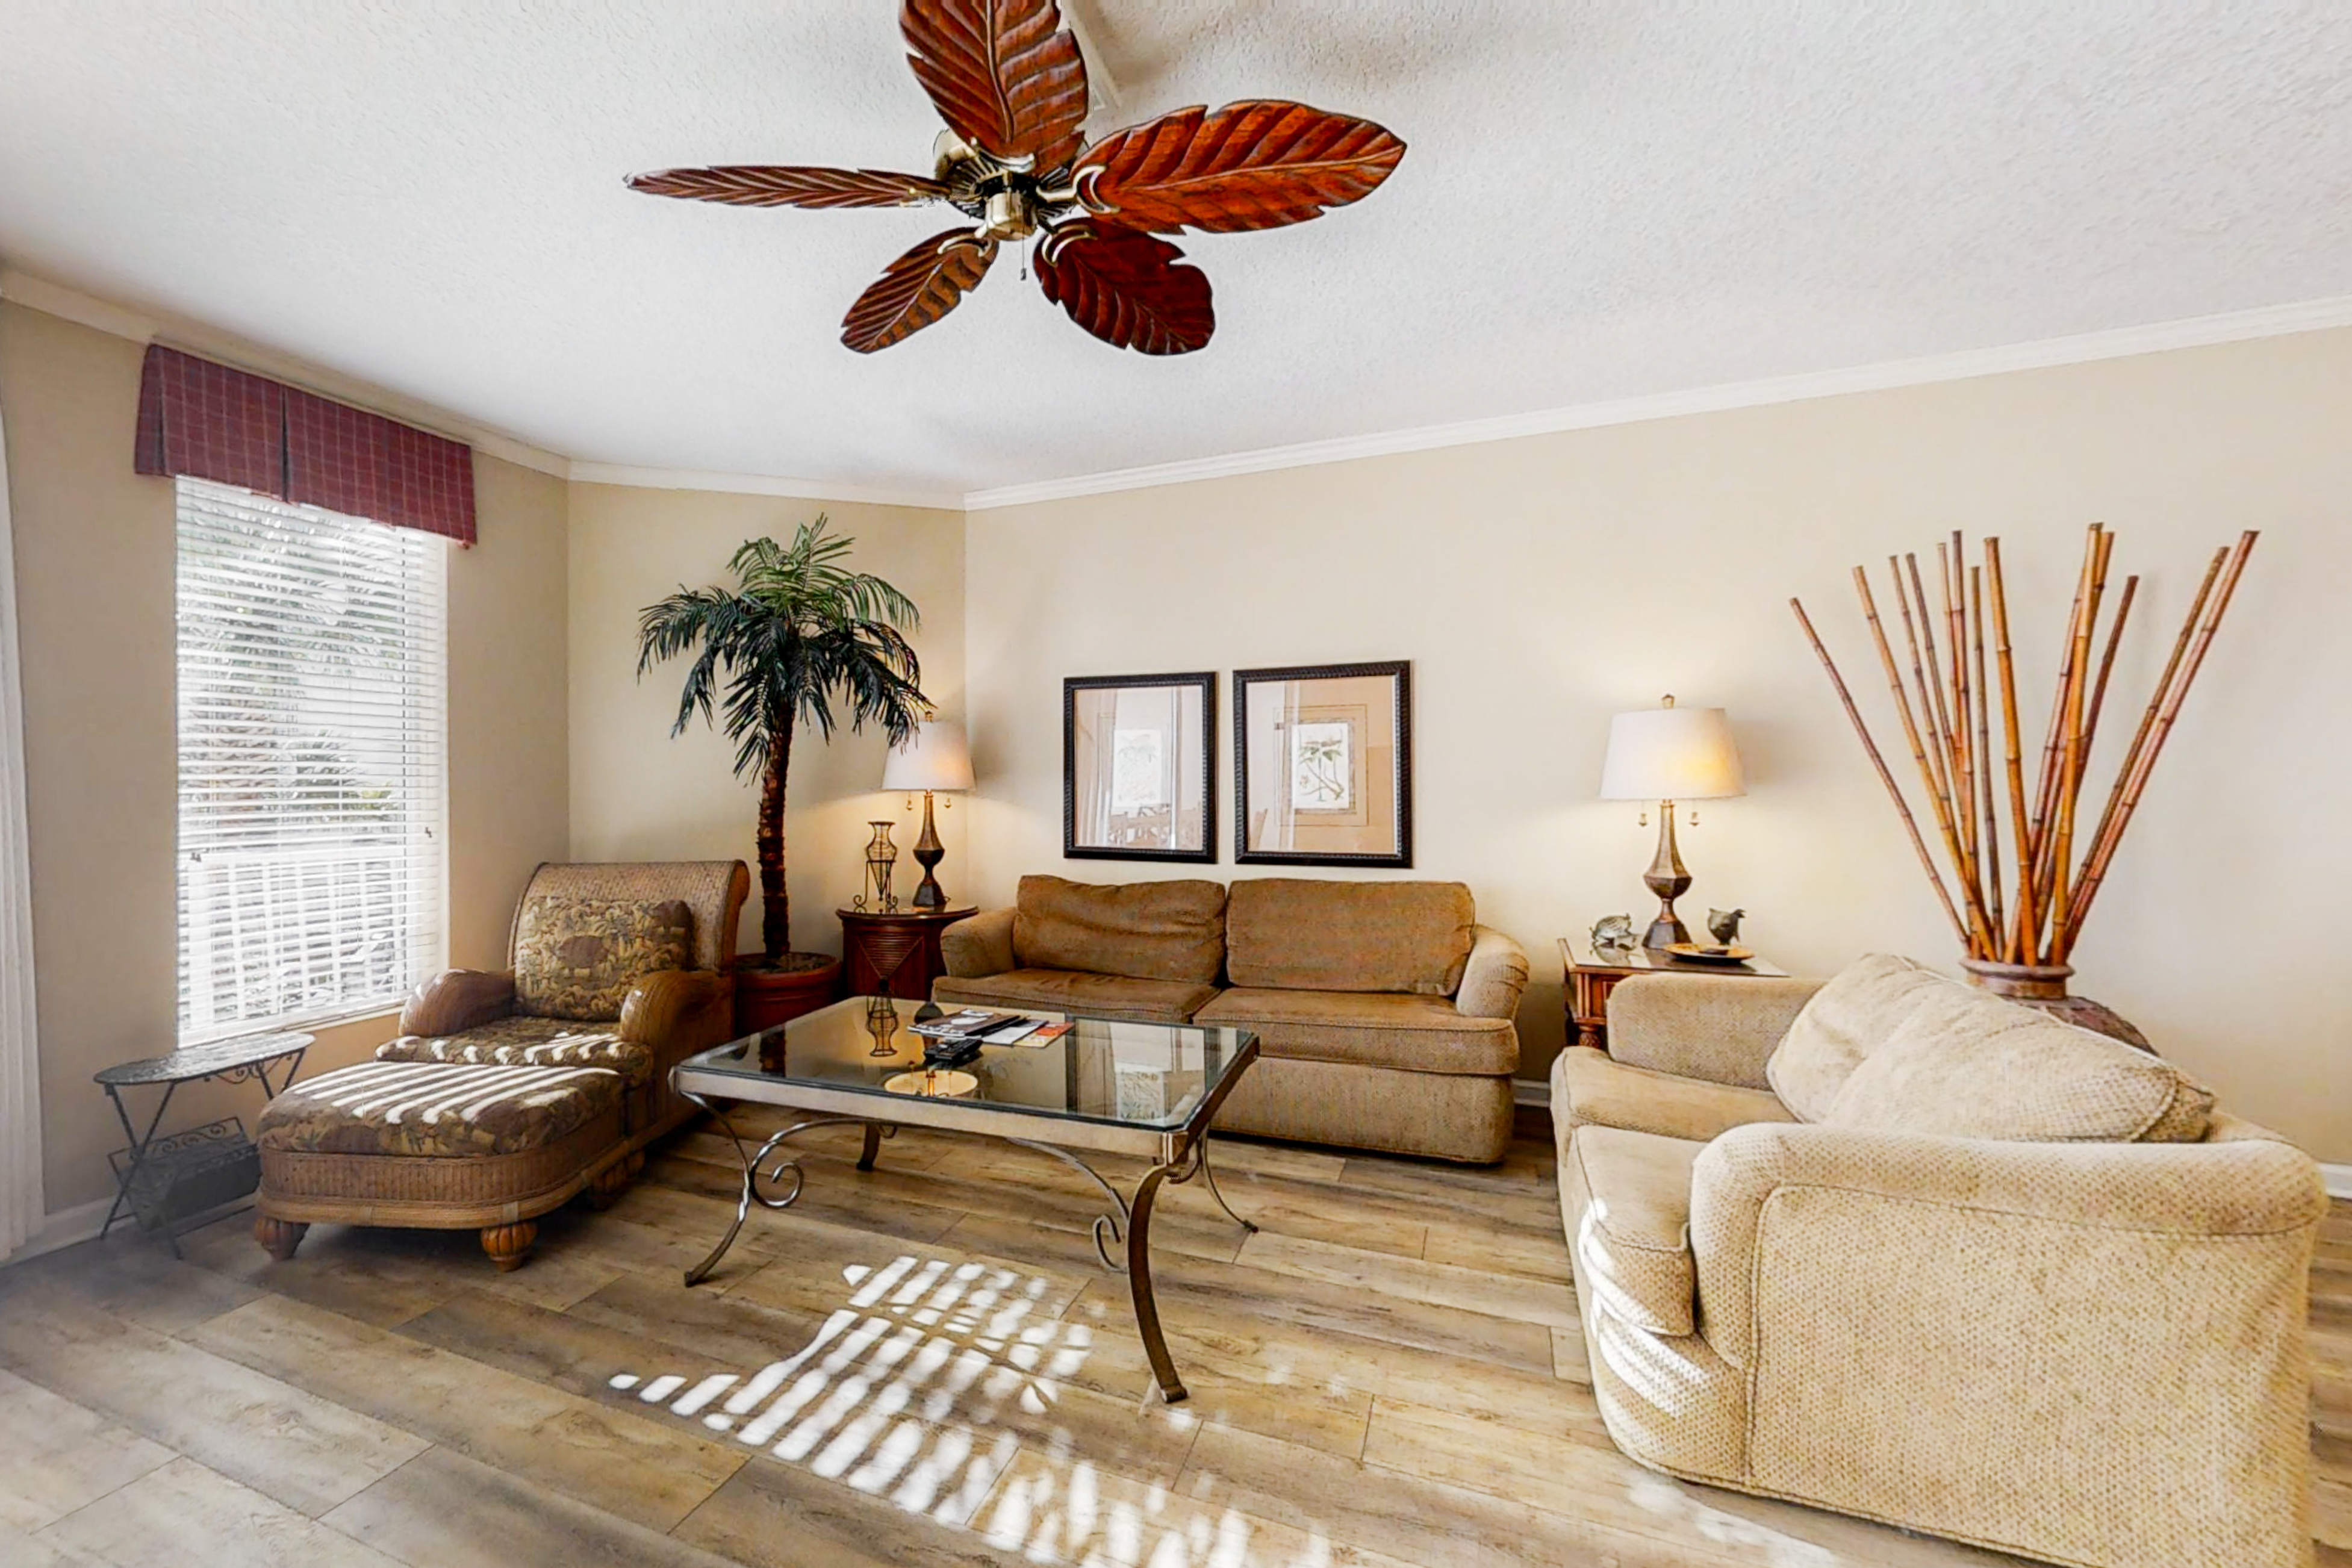 Dunes of Seagrove A108 Condo rental in Dunes of Seagrove in Highway 30-A Florida - #1